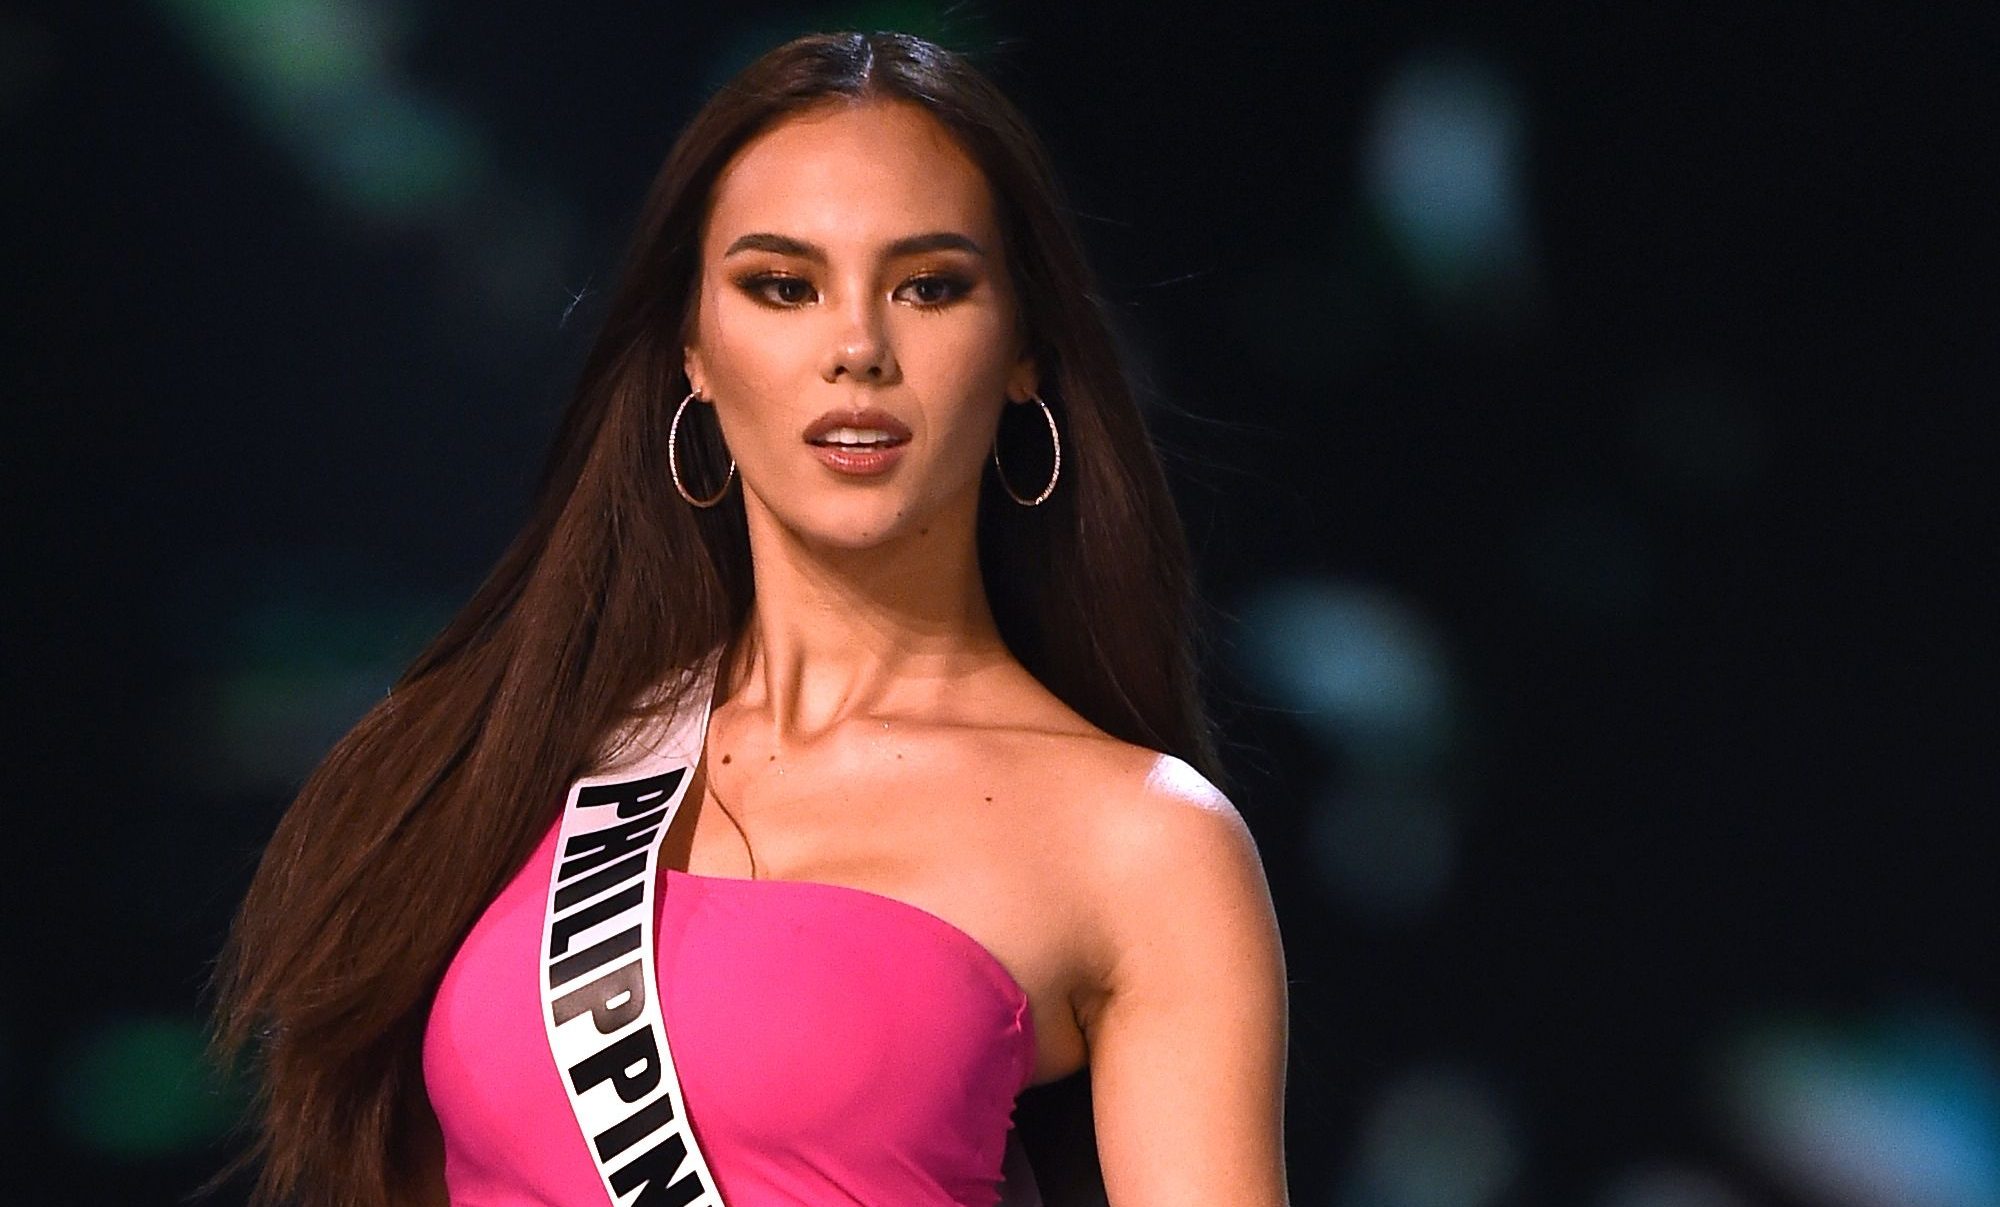 Philippines Catriona Gray Among Favorites In Miss Universe 2018